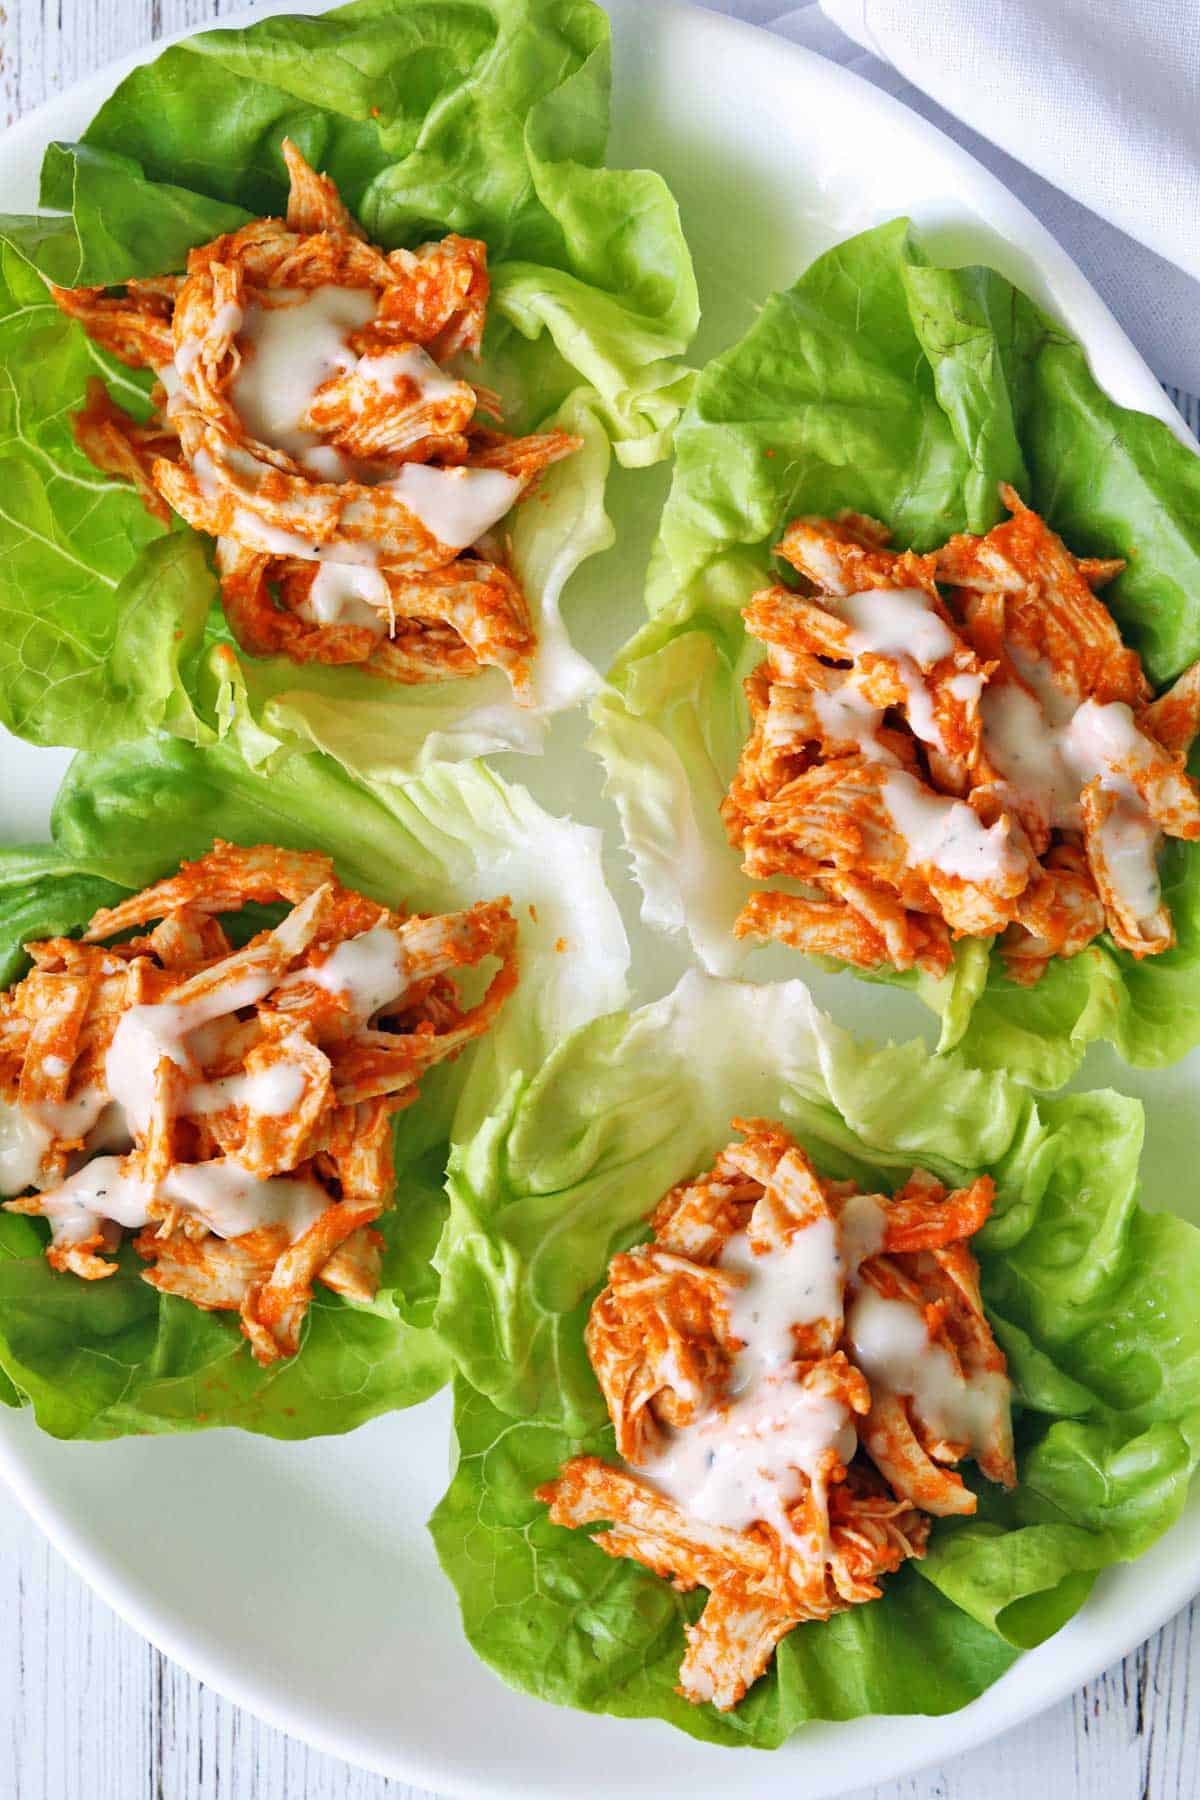 Buffalo chicken lettuce wraps served on a plate.